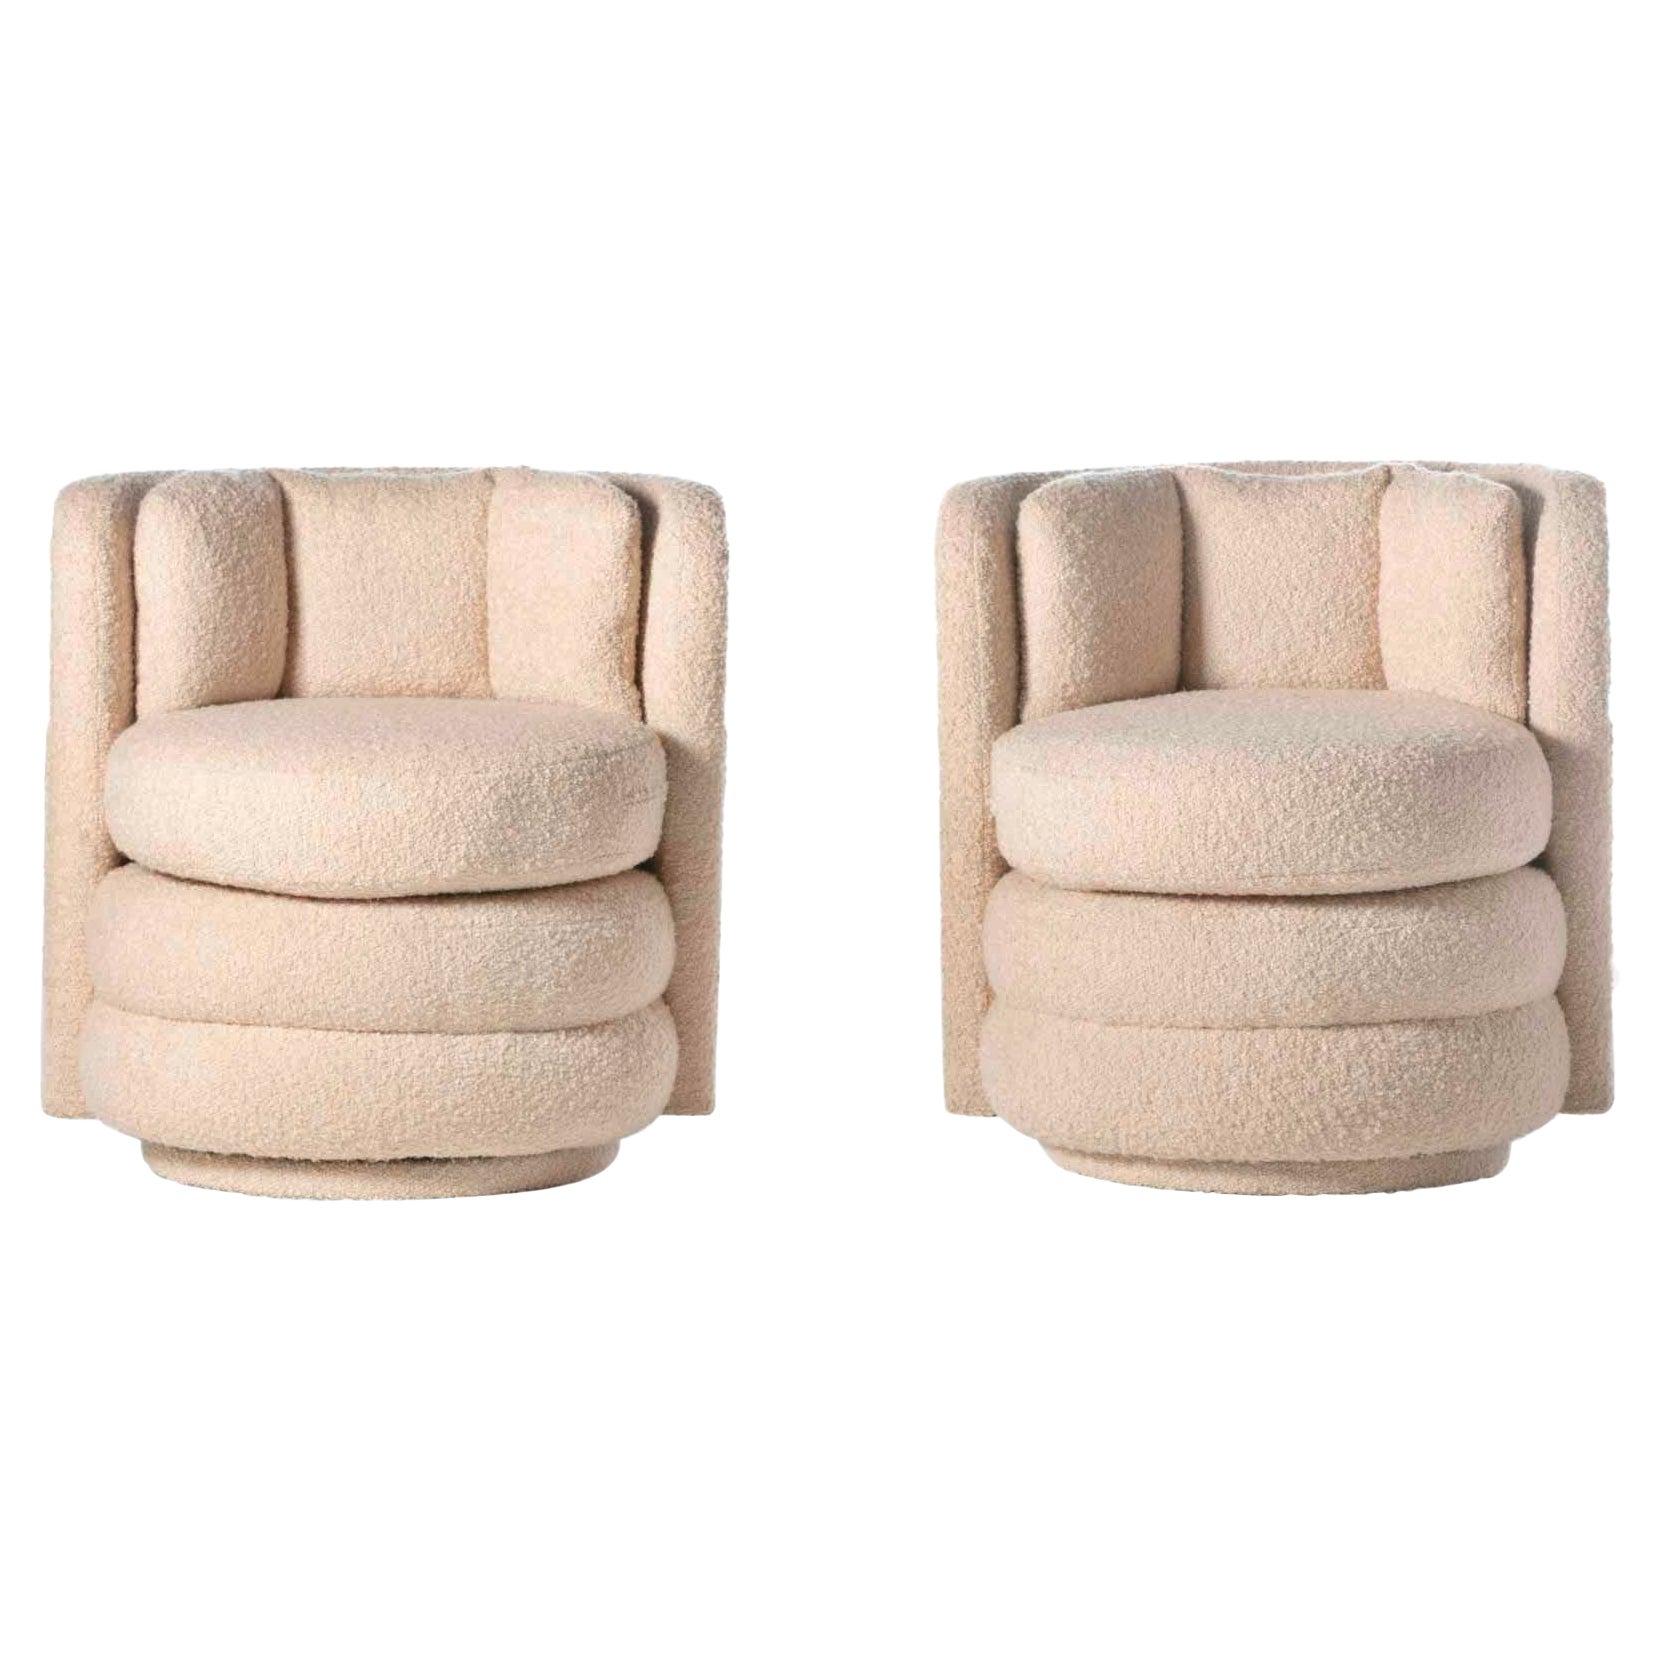 Pair of Post Modern Channeled Swivel Chairs in Blush Pink Bouclé For Sale